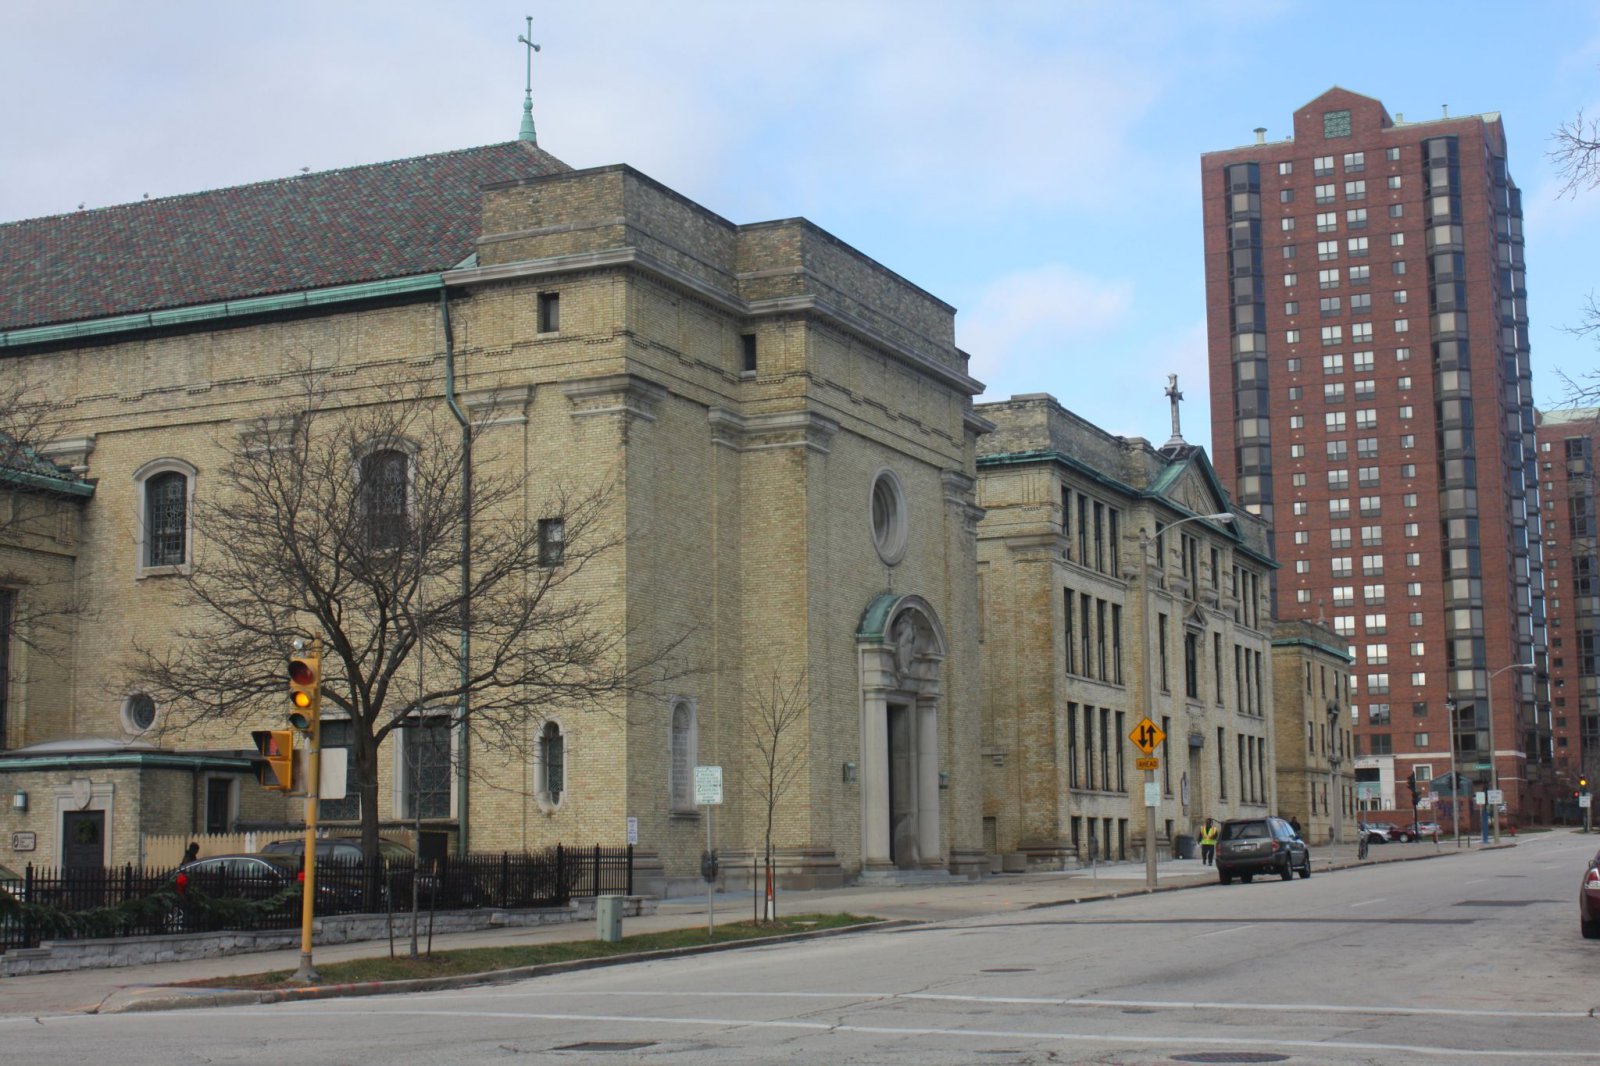 St. John's Cathedral buildings. Photo taken December 15th, 2015 by Carl Baehr.